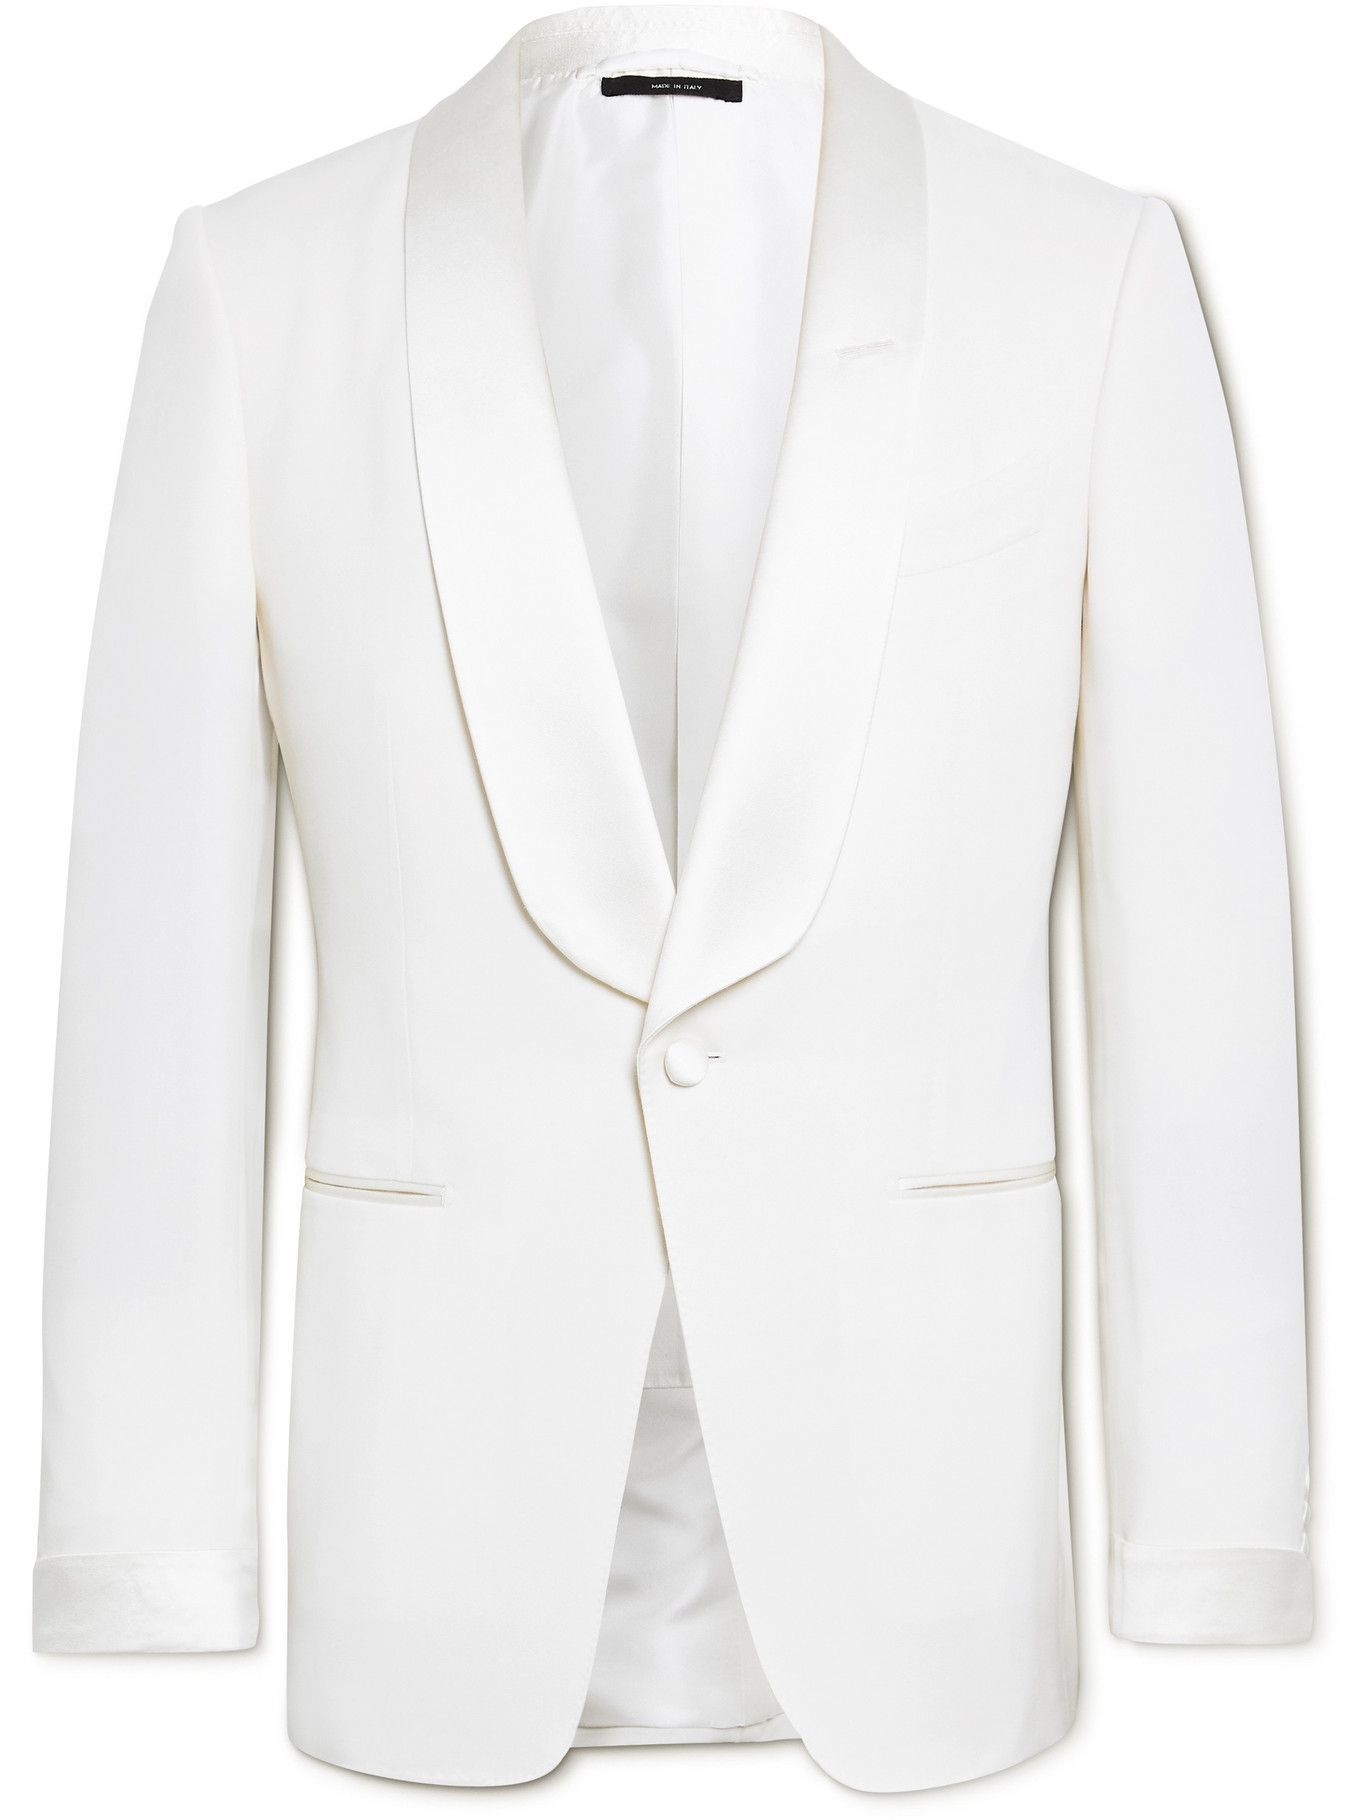 TOM FORD - O'Connor Slim-Fit Satin-Trimmed Wool and Mohair-Blend Tuxedo ...